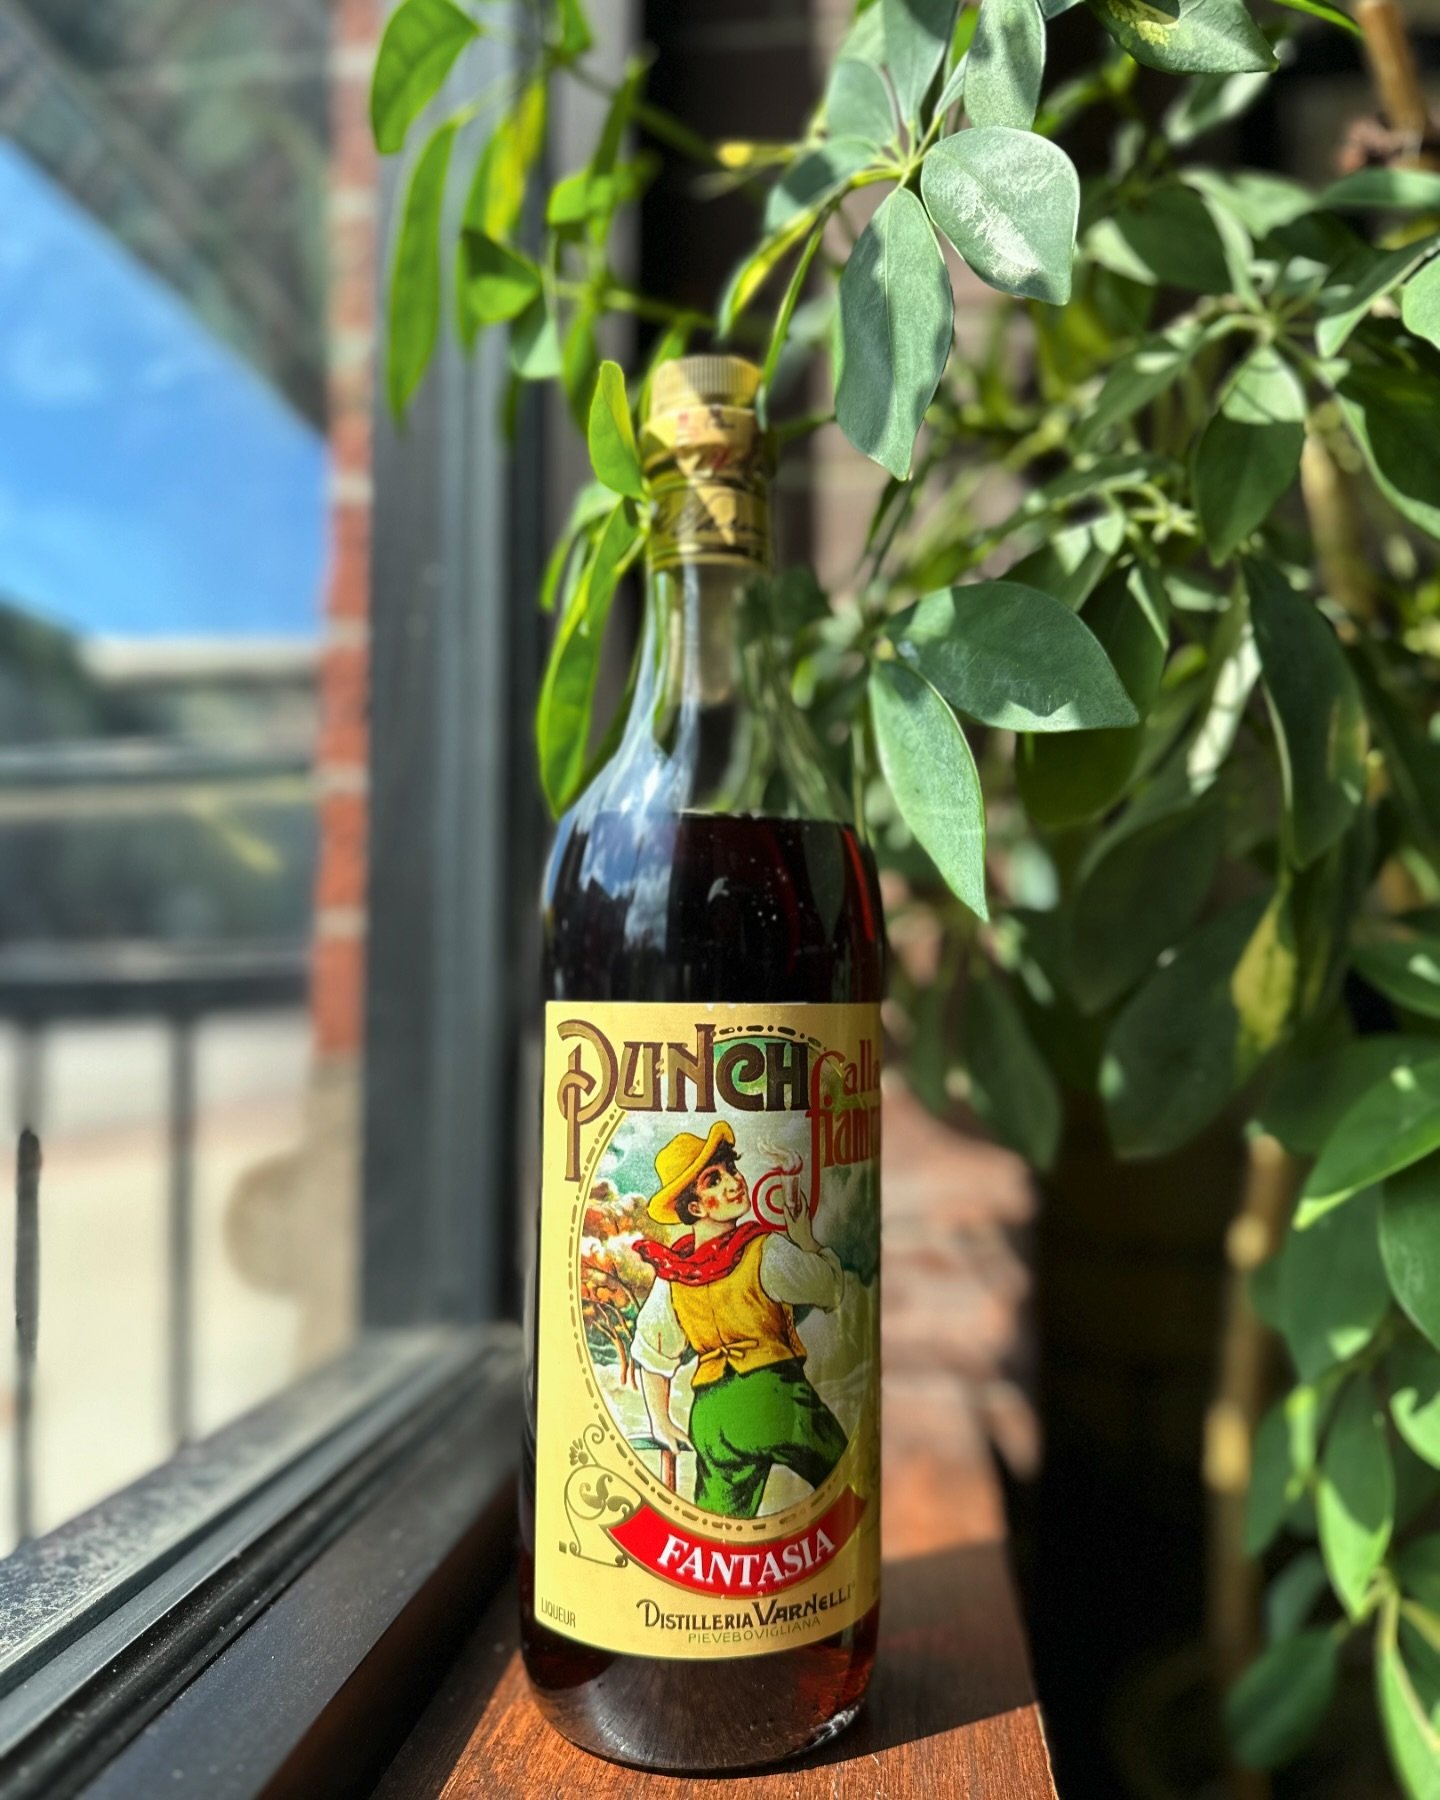 New Amaro joining the family! Punch Fantasia from Distilleria Varnelli is the newest Amaro on the list. Try a pour of this, or any of our Amari with your dessert + end your meal on a great note. 

$5 all weekend

We&rsquo;ll see you soon!